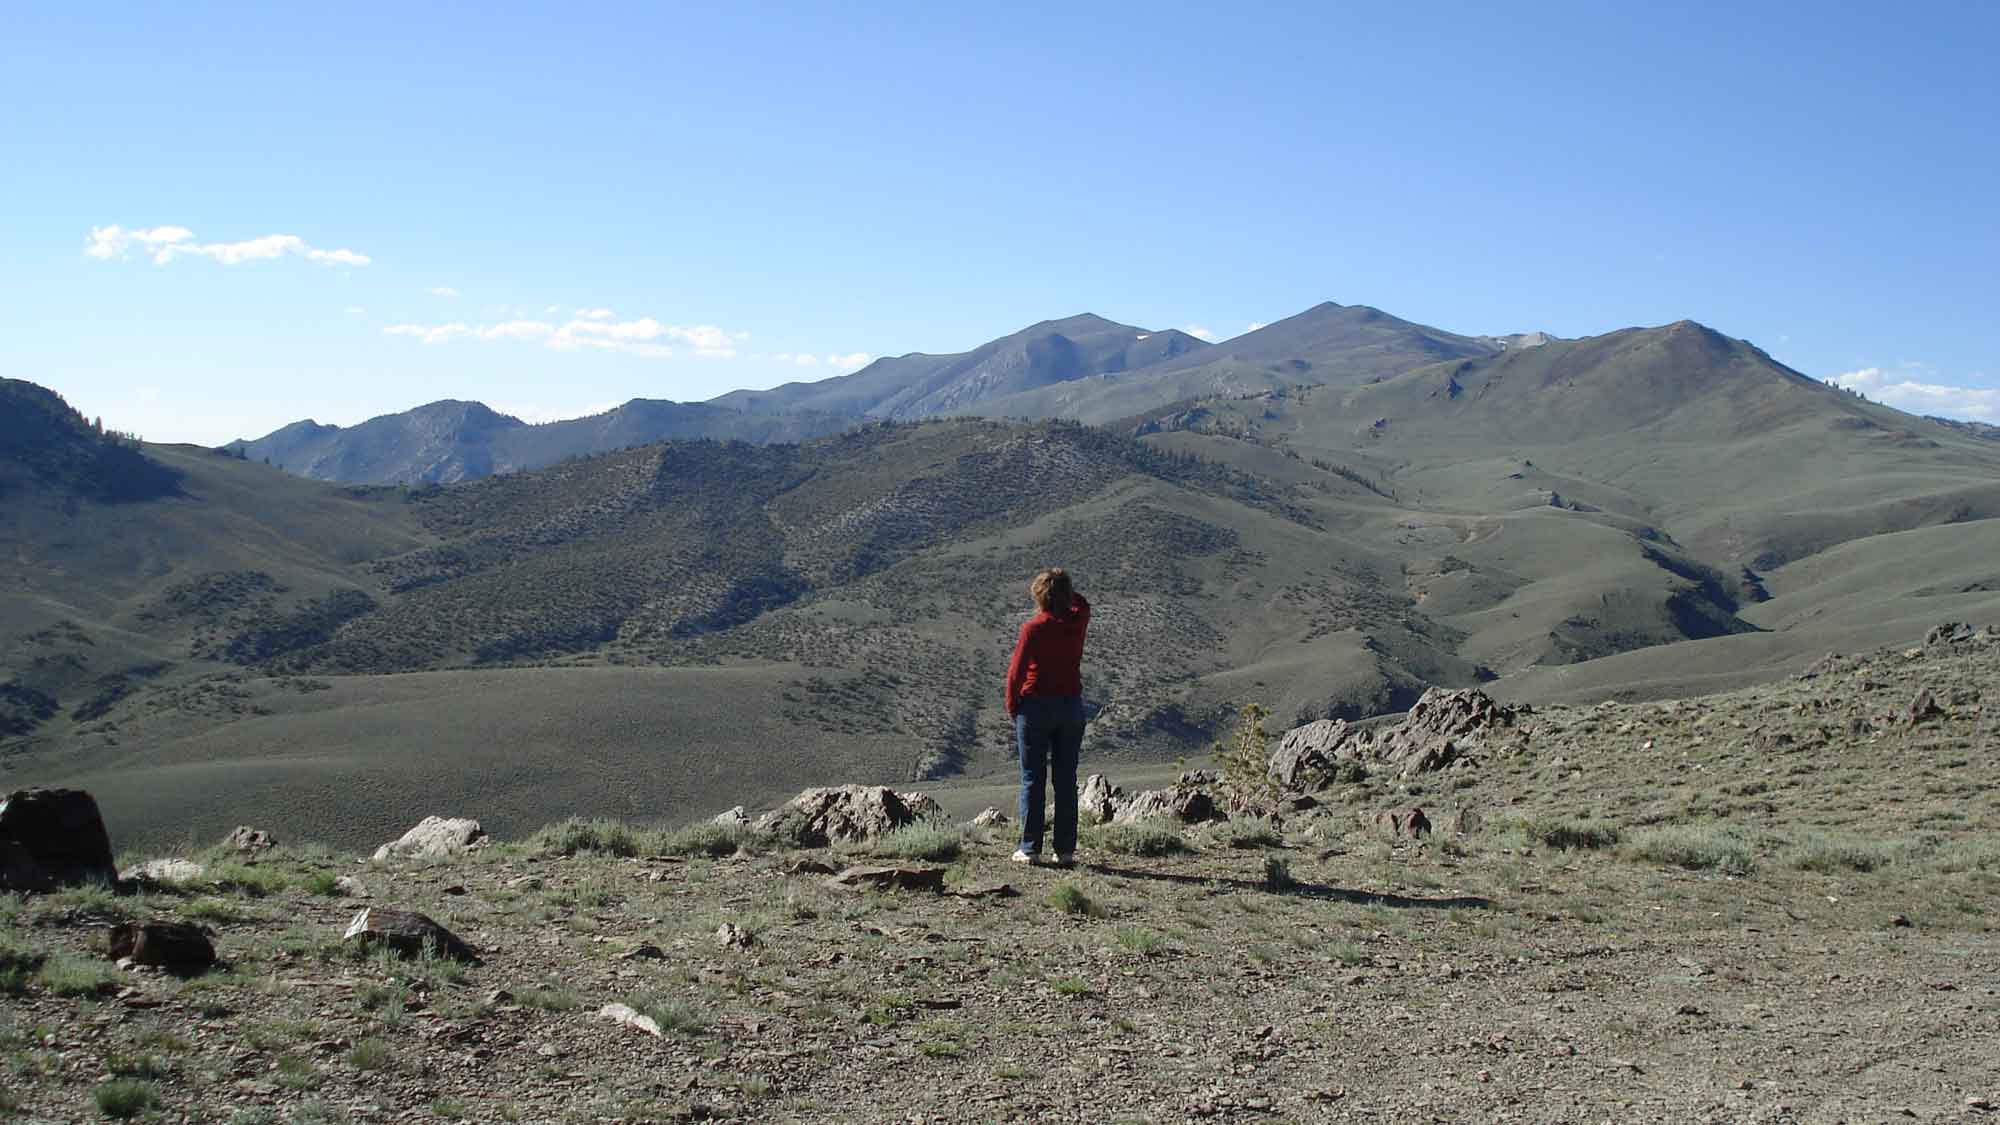 Photograph of a woman looking at mountains.